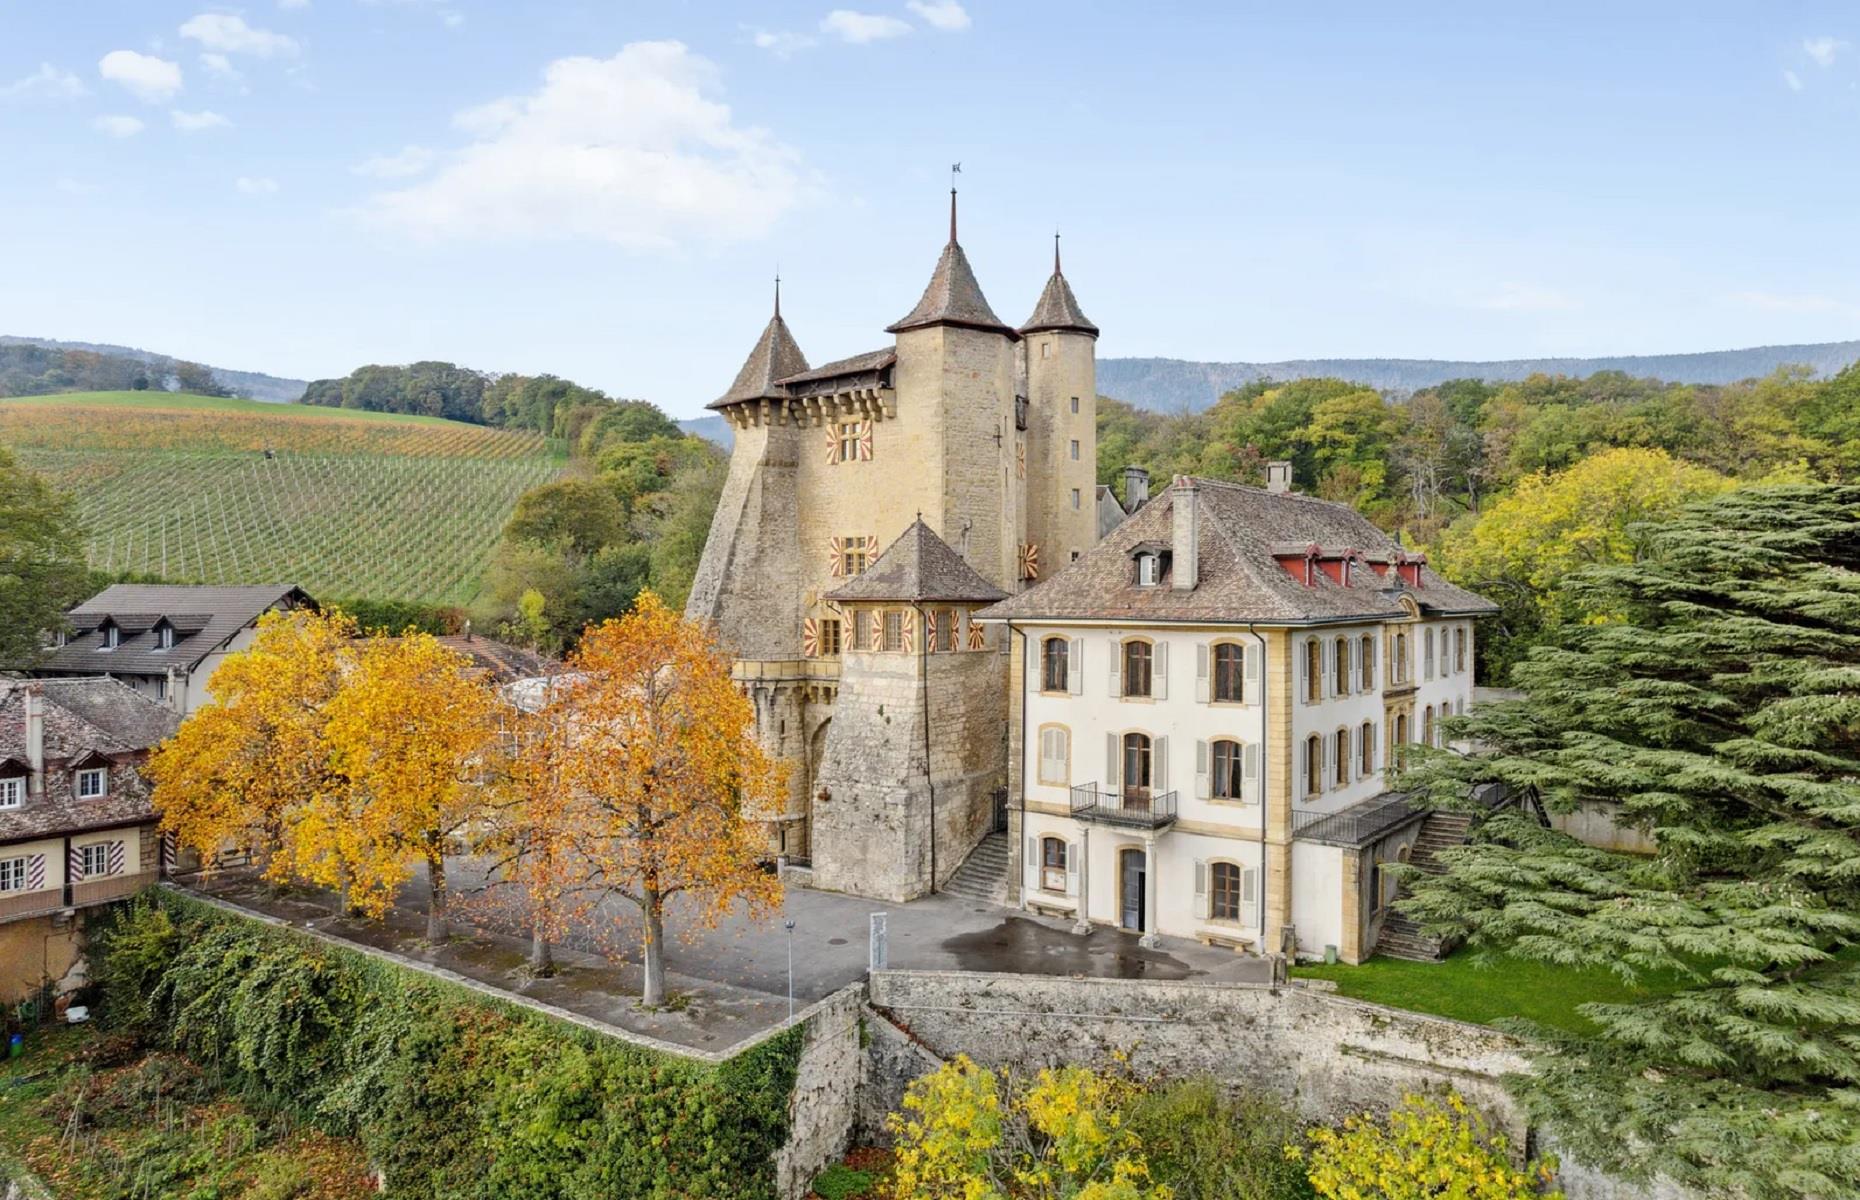 Enchanting castles fit for royalty